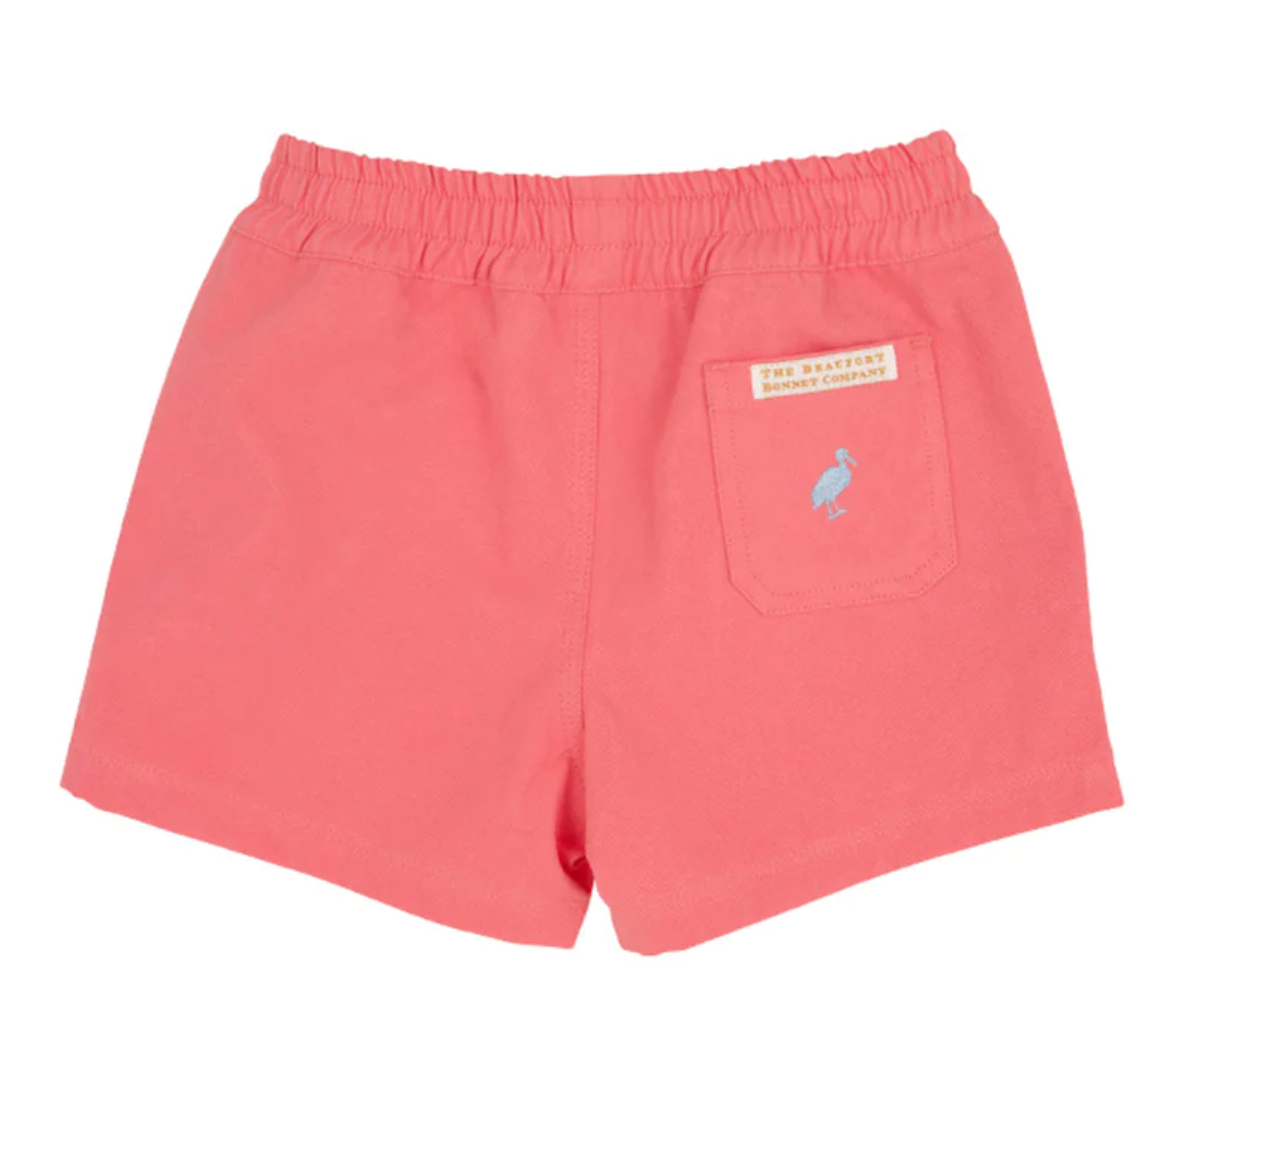 Sheffield Shorts Parrot Cay Coral With Beale Street Blue Stork